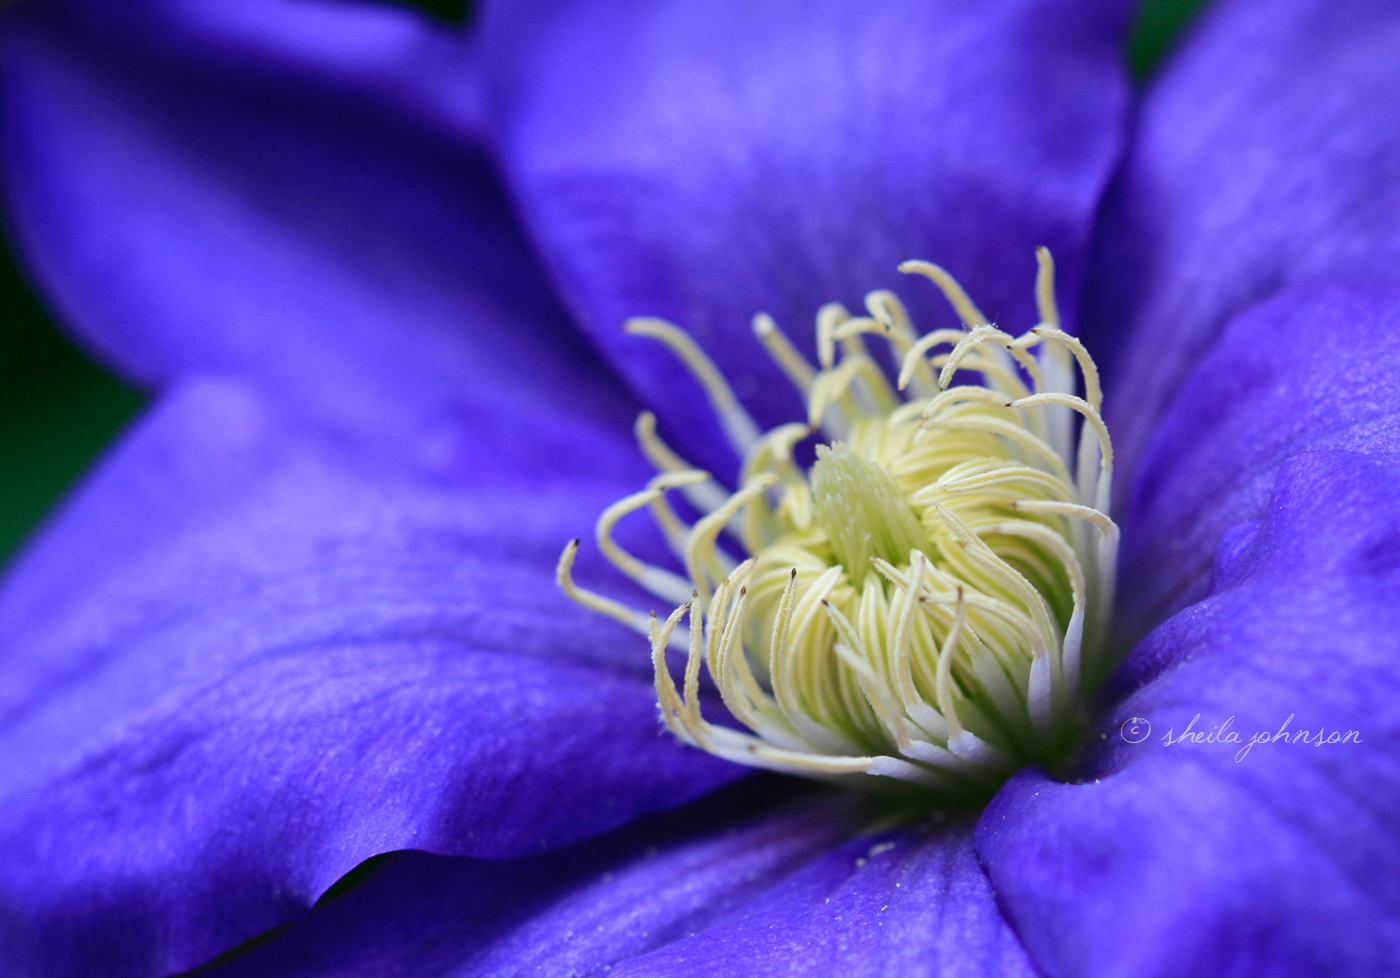 A Flower Does Not Compete; It Just Blooms. This Purple Clematis Is Perfection, Regardless Of The Flowers Blooming Adjacent To It.